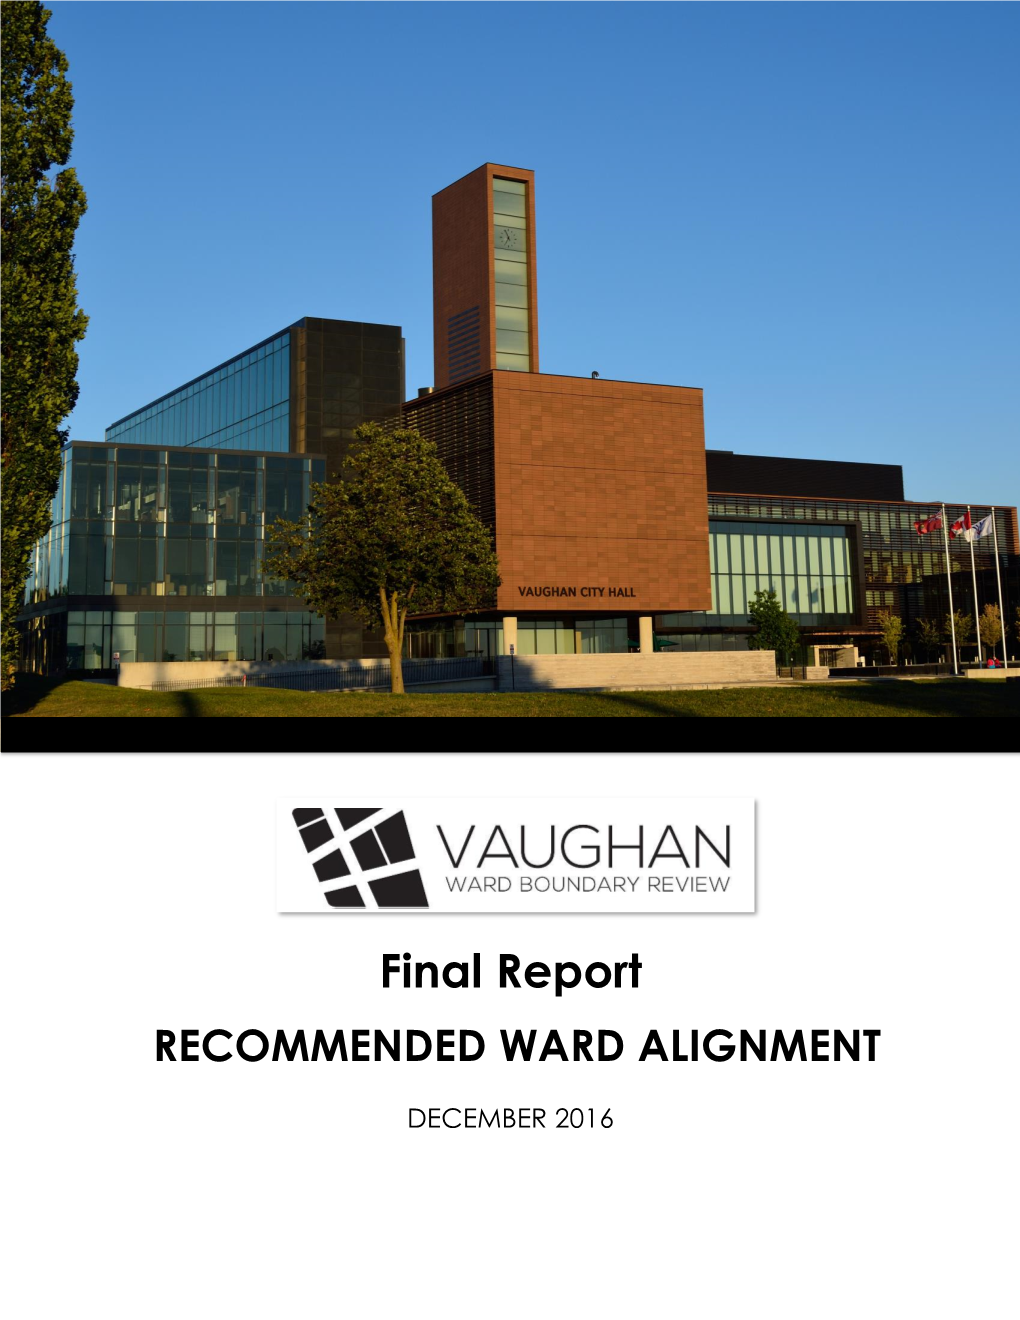 Final Report RECOMMENDED WARD ALIGNMENT